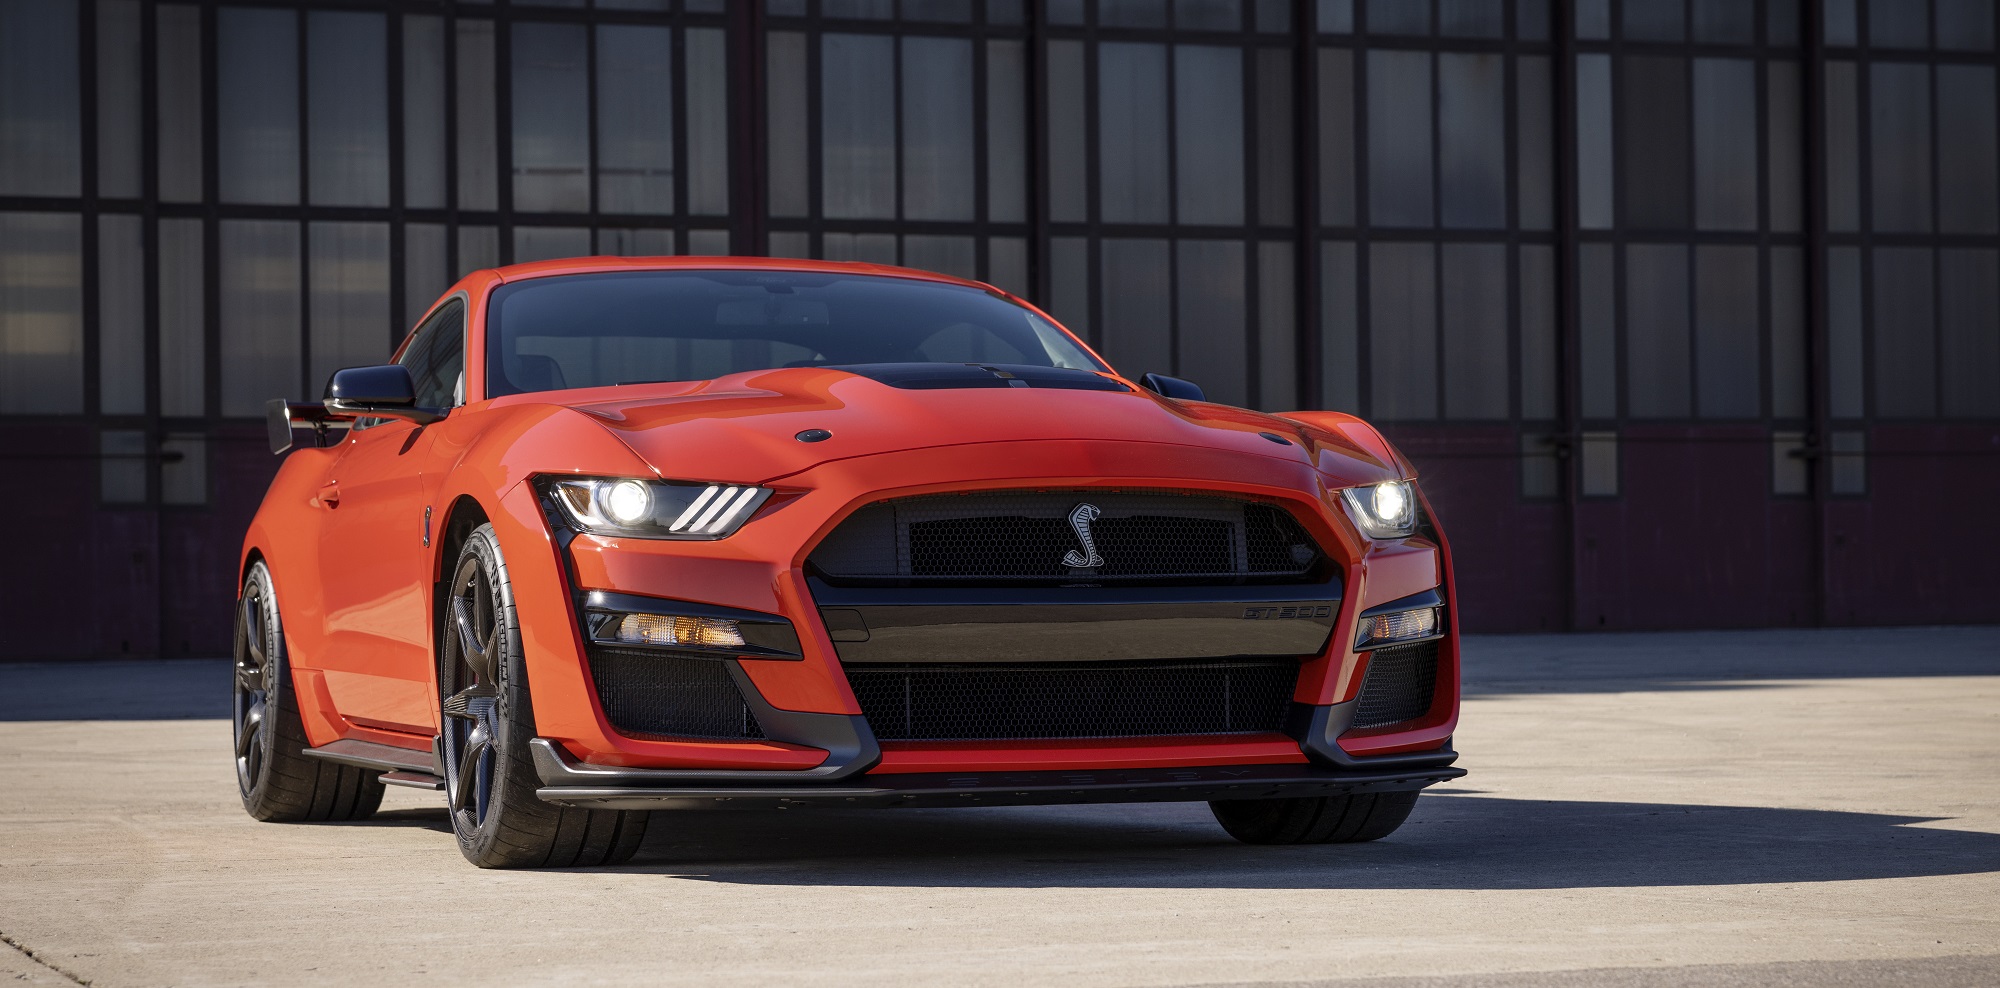 The Ford Mustang Shelby GT500, like the GT350R and Mach 1, is one of the fastest Mustangs ever.